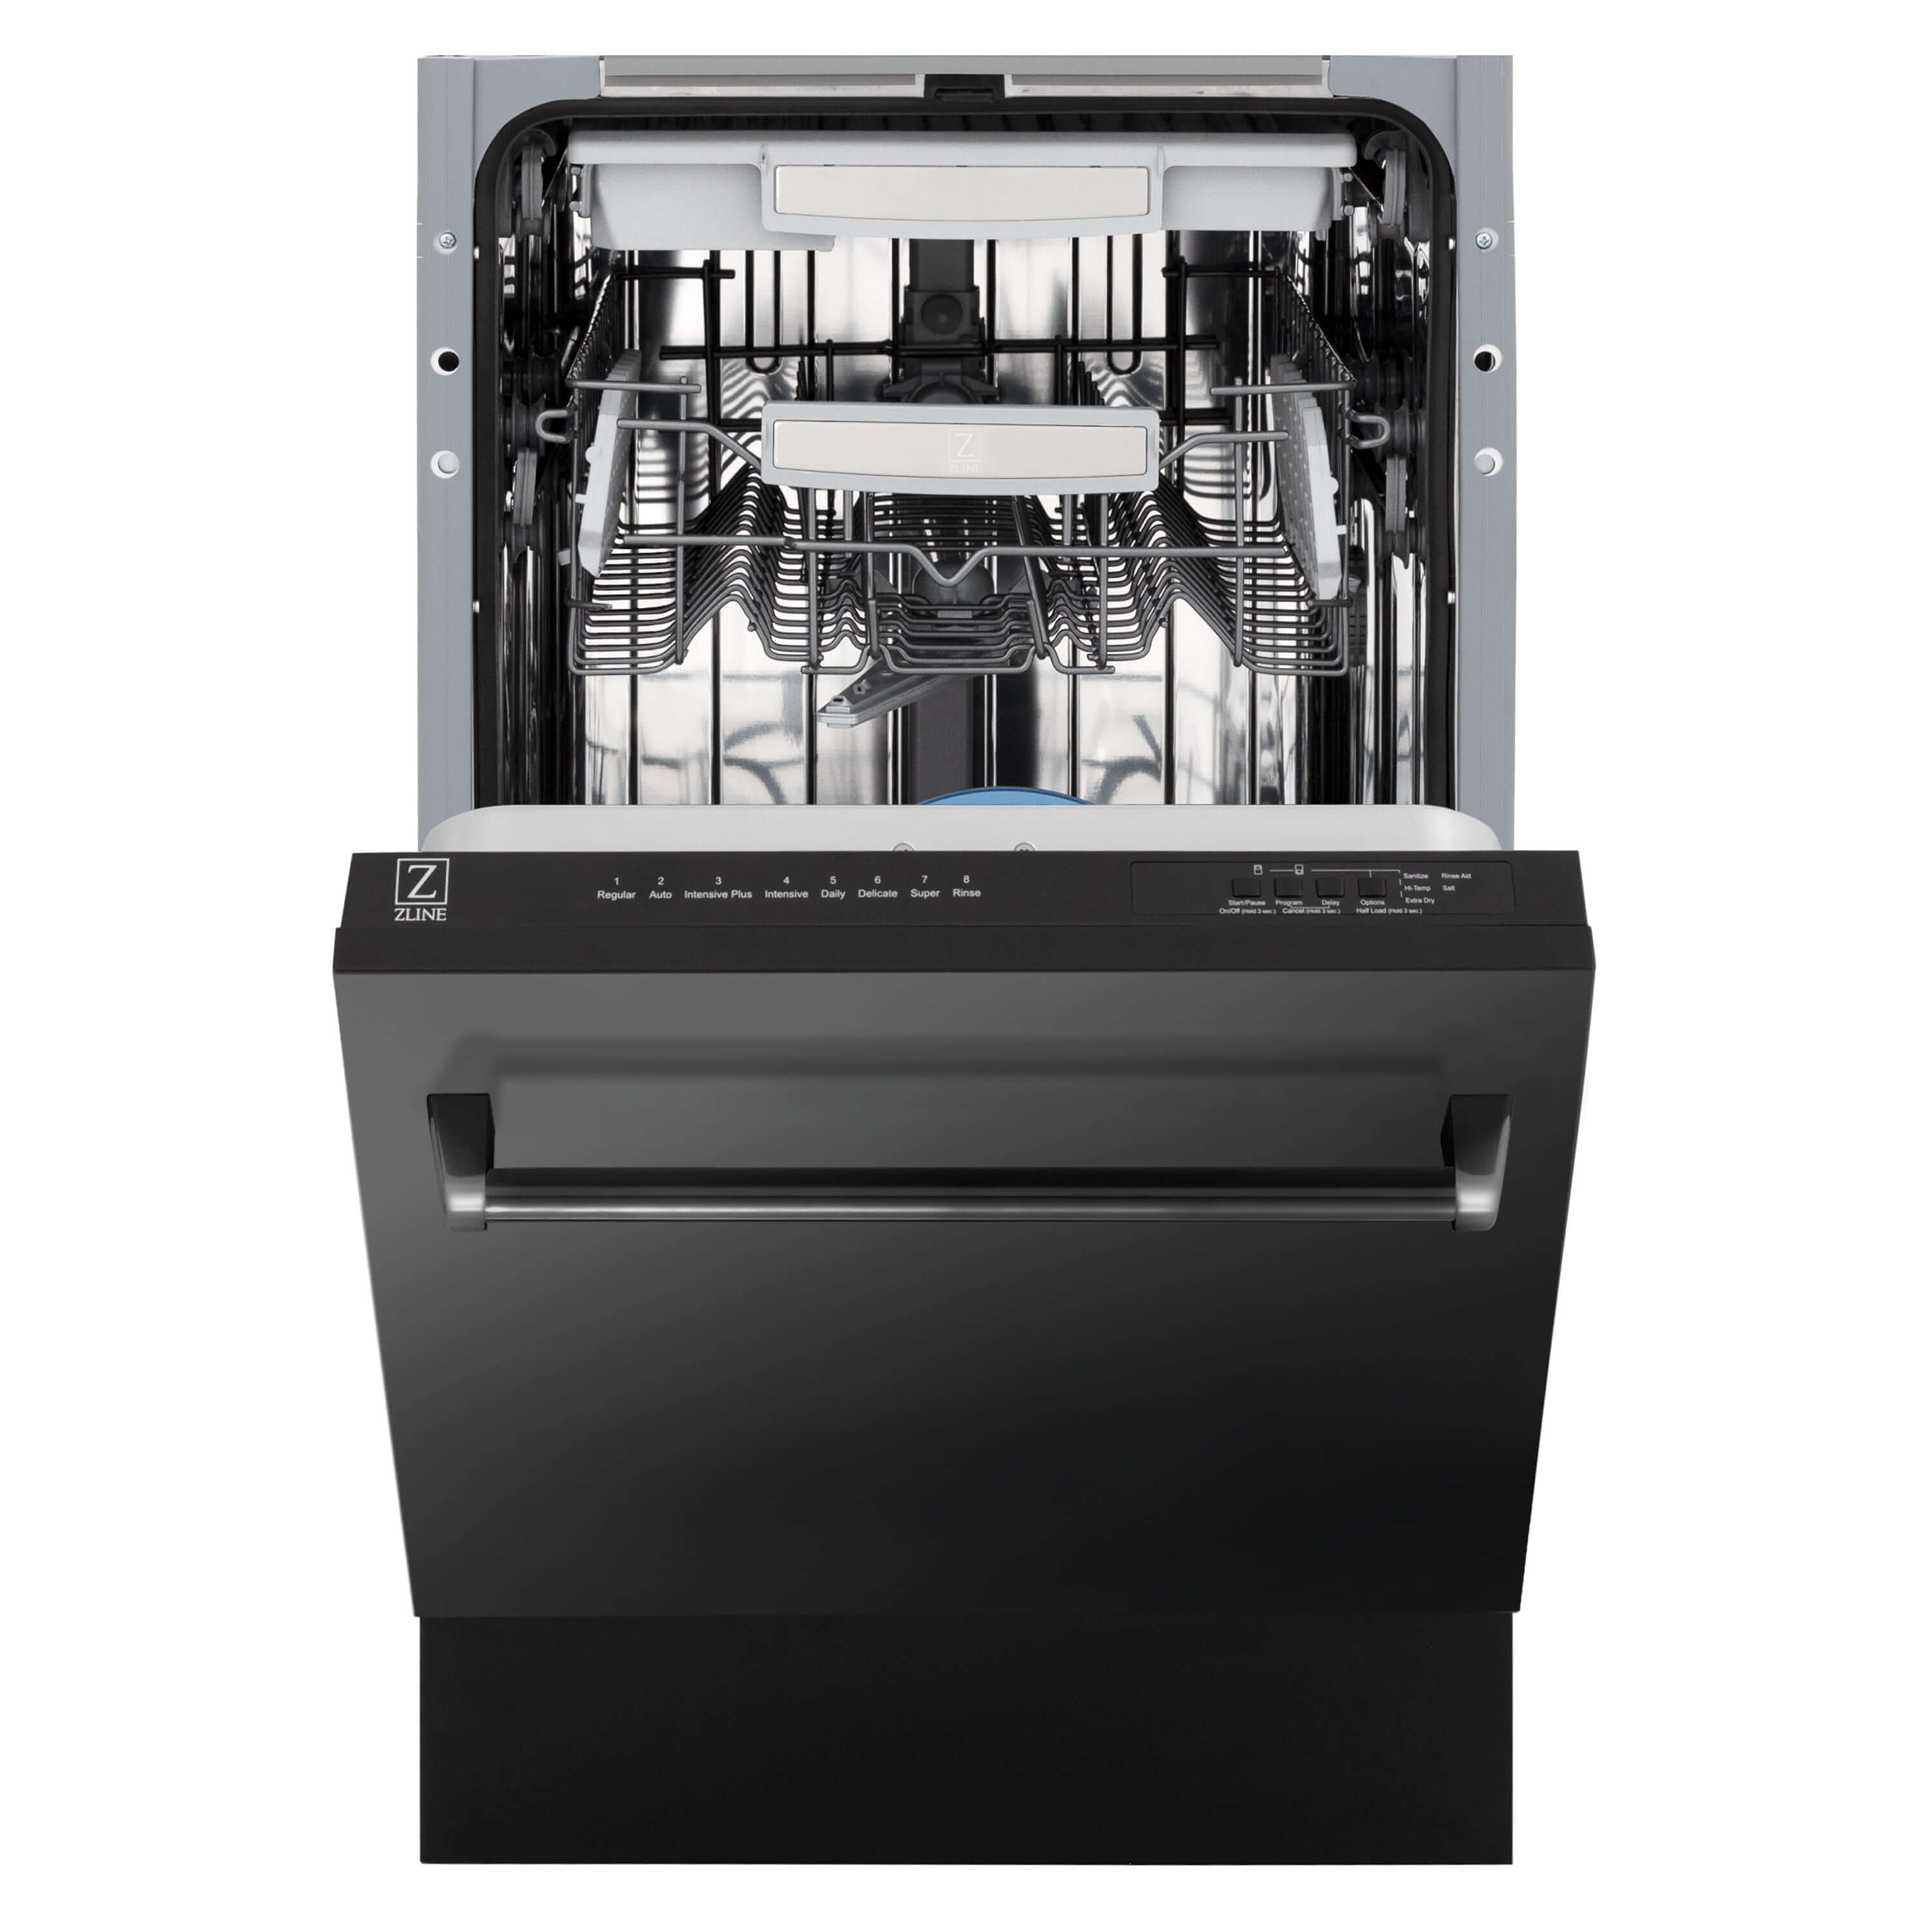 ZLINE 18 in. Tallac Series 3rd Rack Top Control Built-In Dishwasher in Black Stainless Steel with Stainless Steel Tub, 51dBa (DWV-BS-18) front, half open.